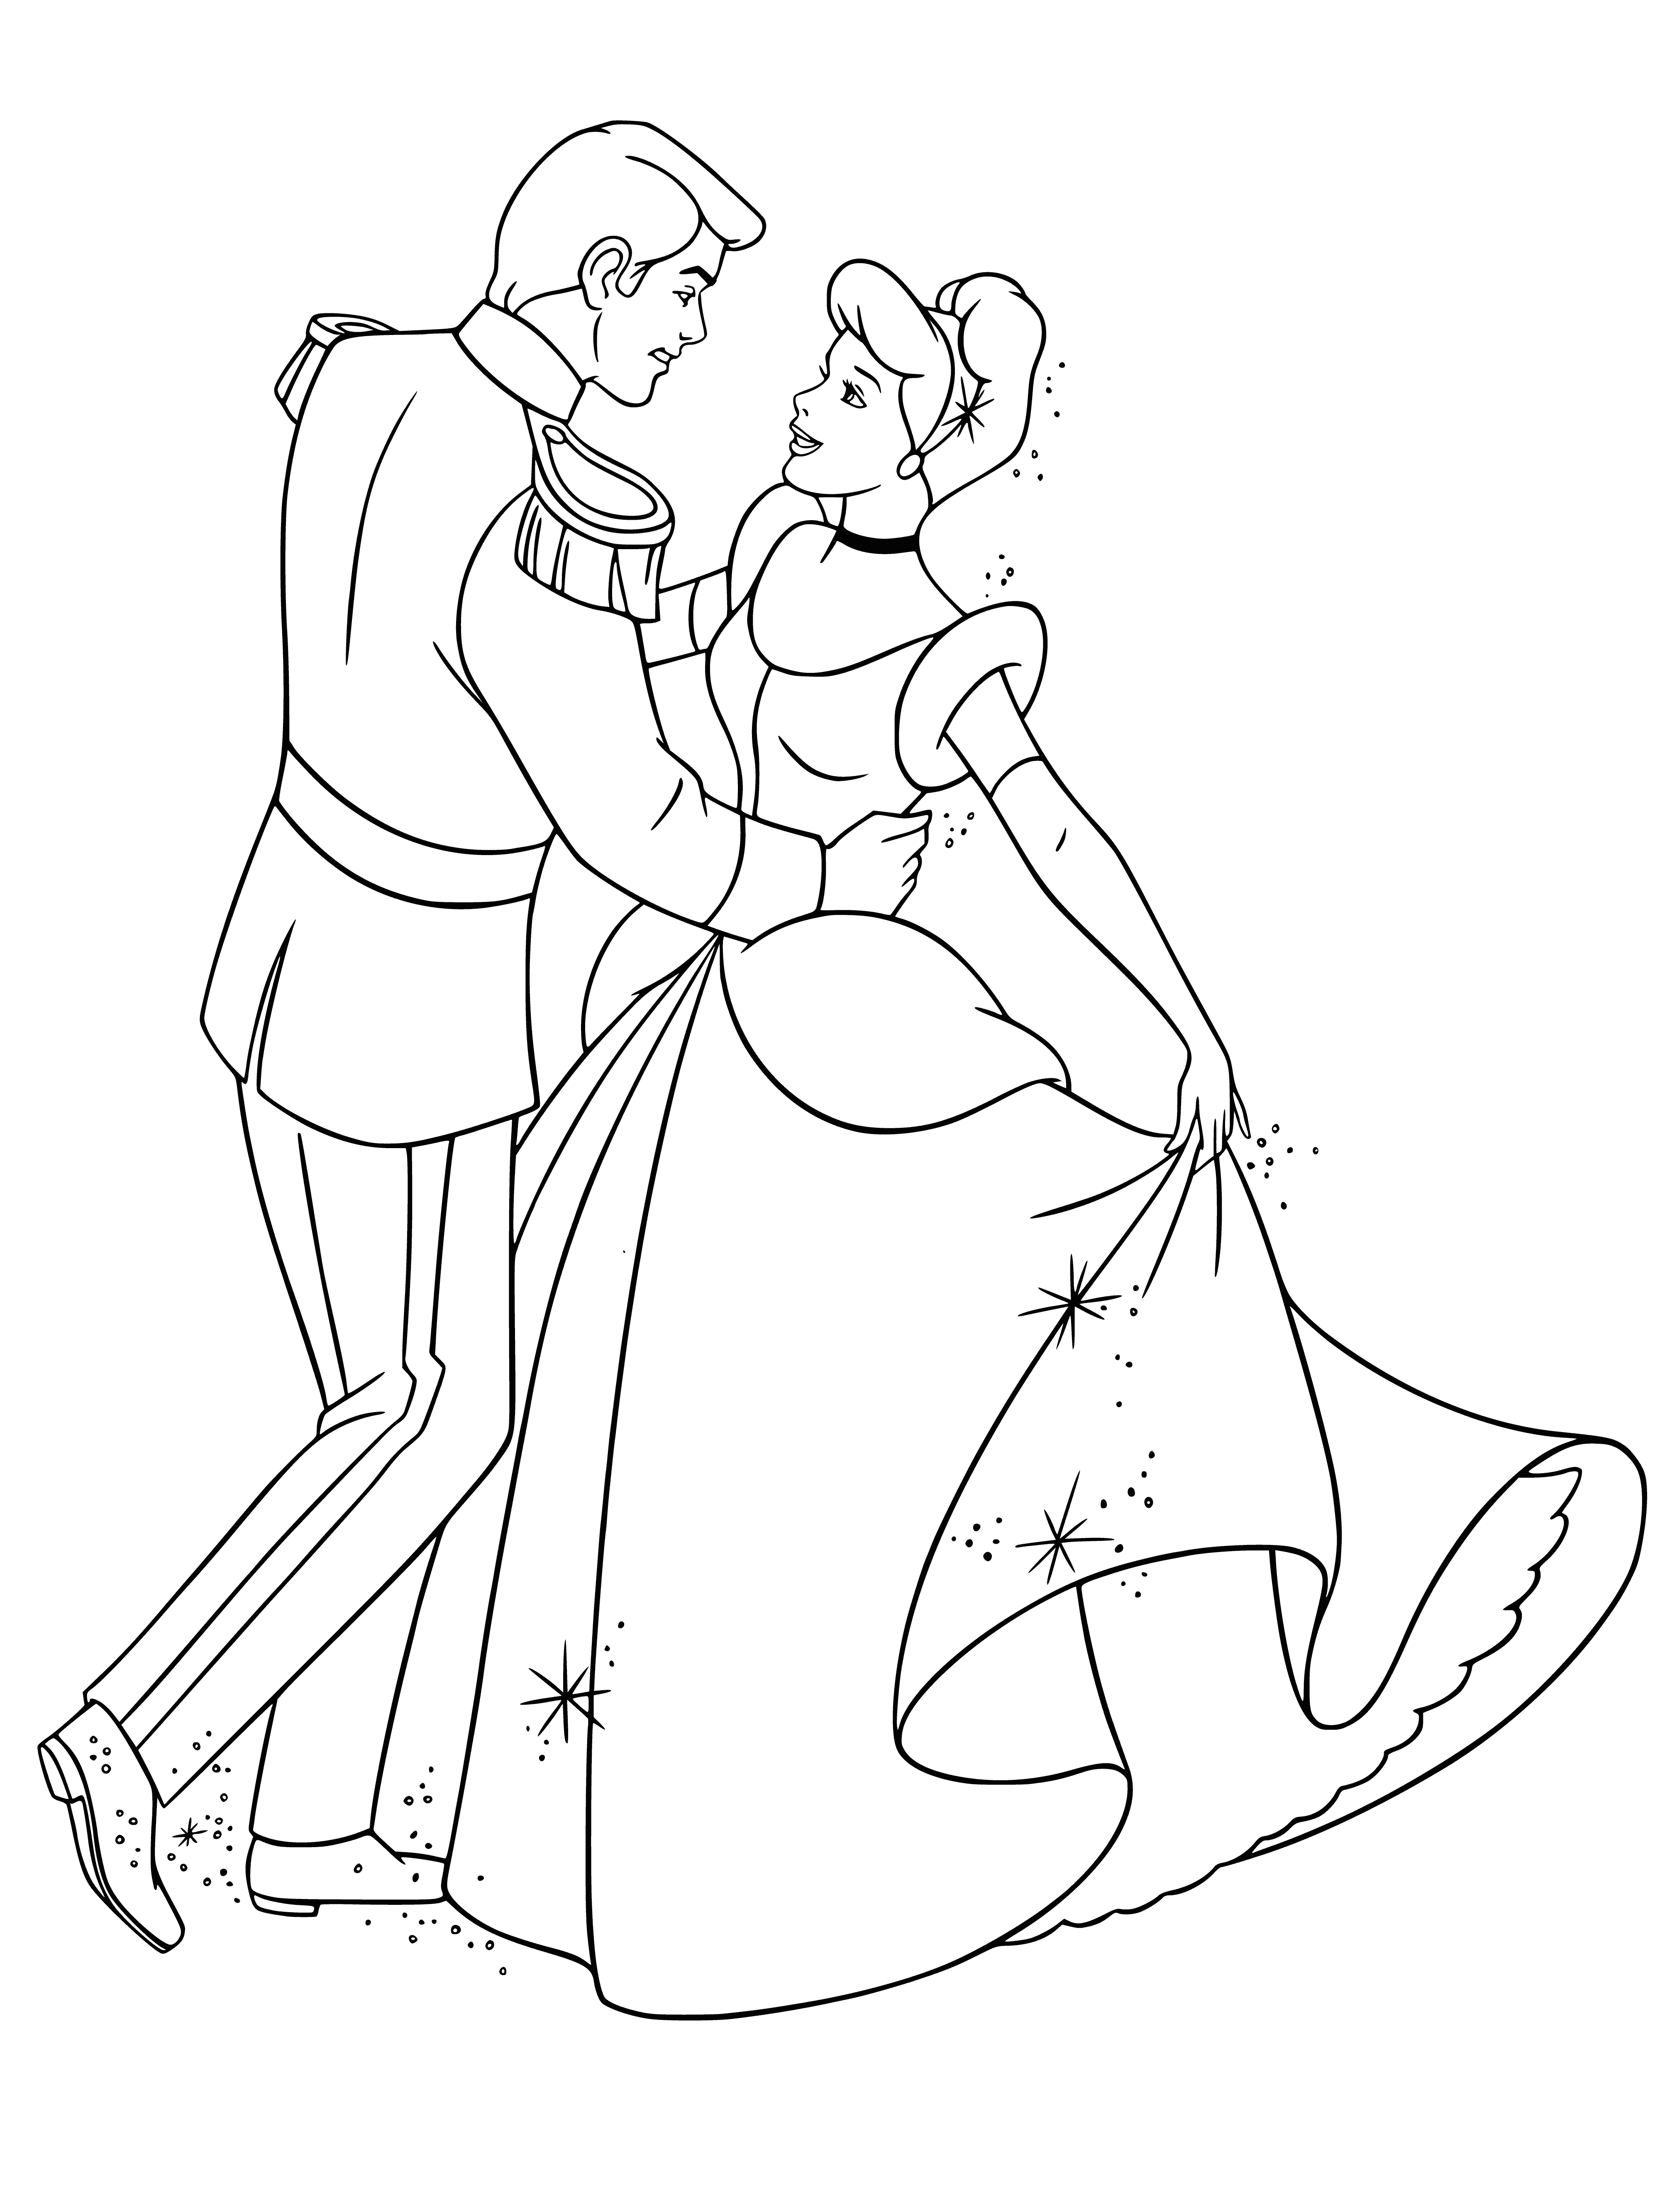 coloring page: Cinderella & prince dance happily at the ball. She wears a white dress & glass slippers. He has a white shirt & sword. Both smiling. #happilyeverafter